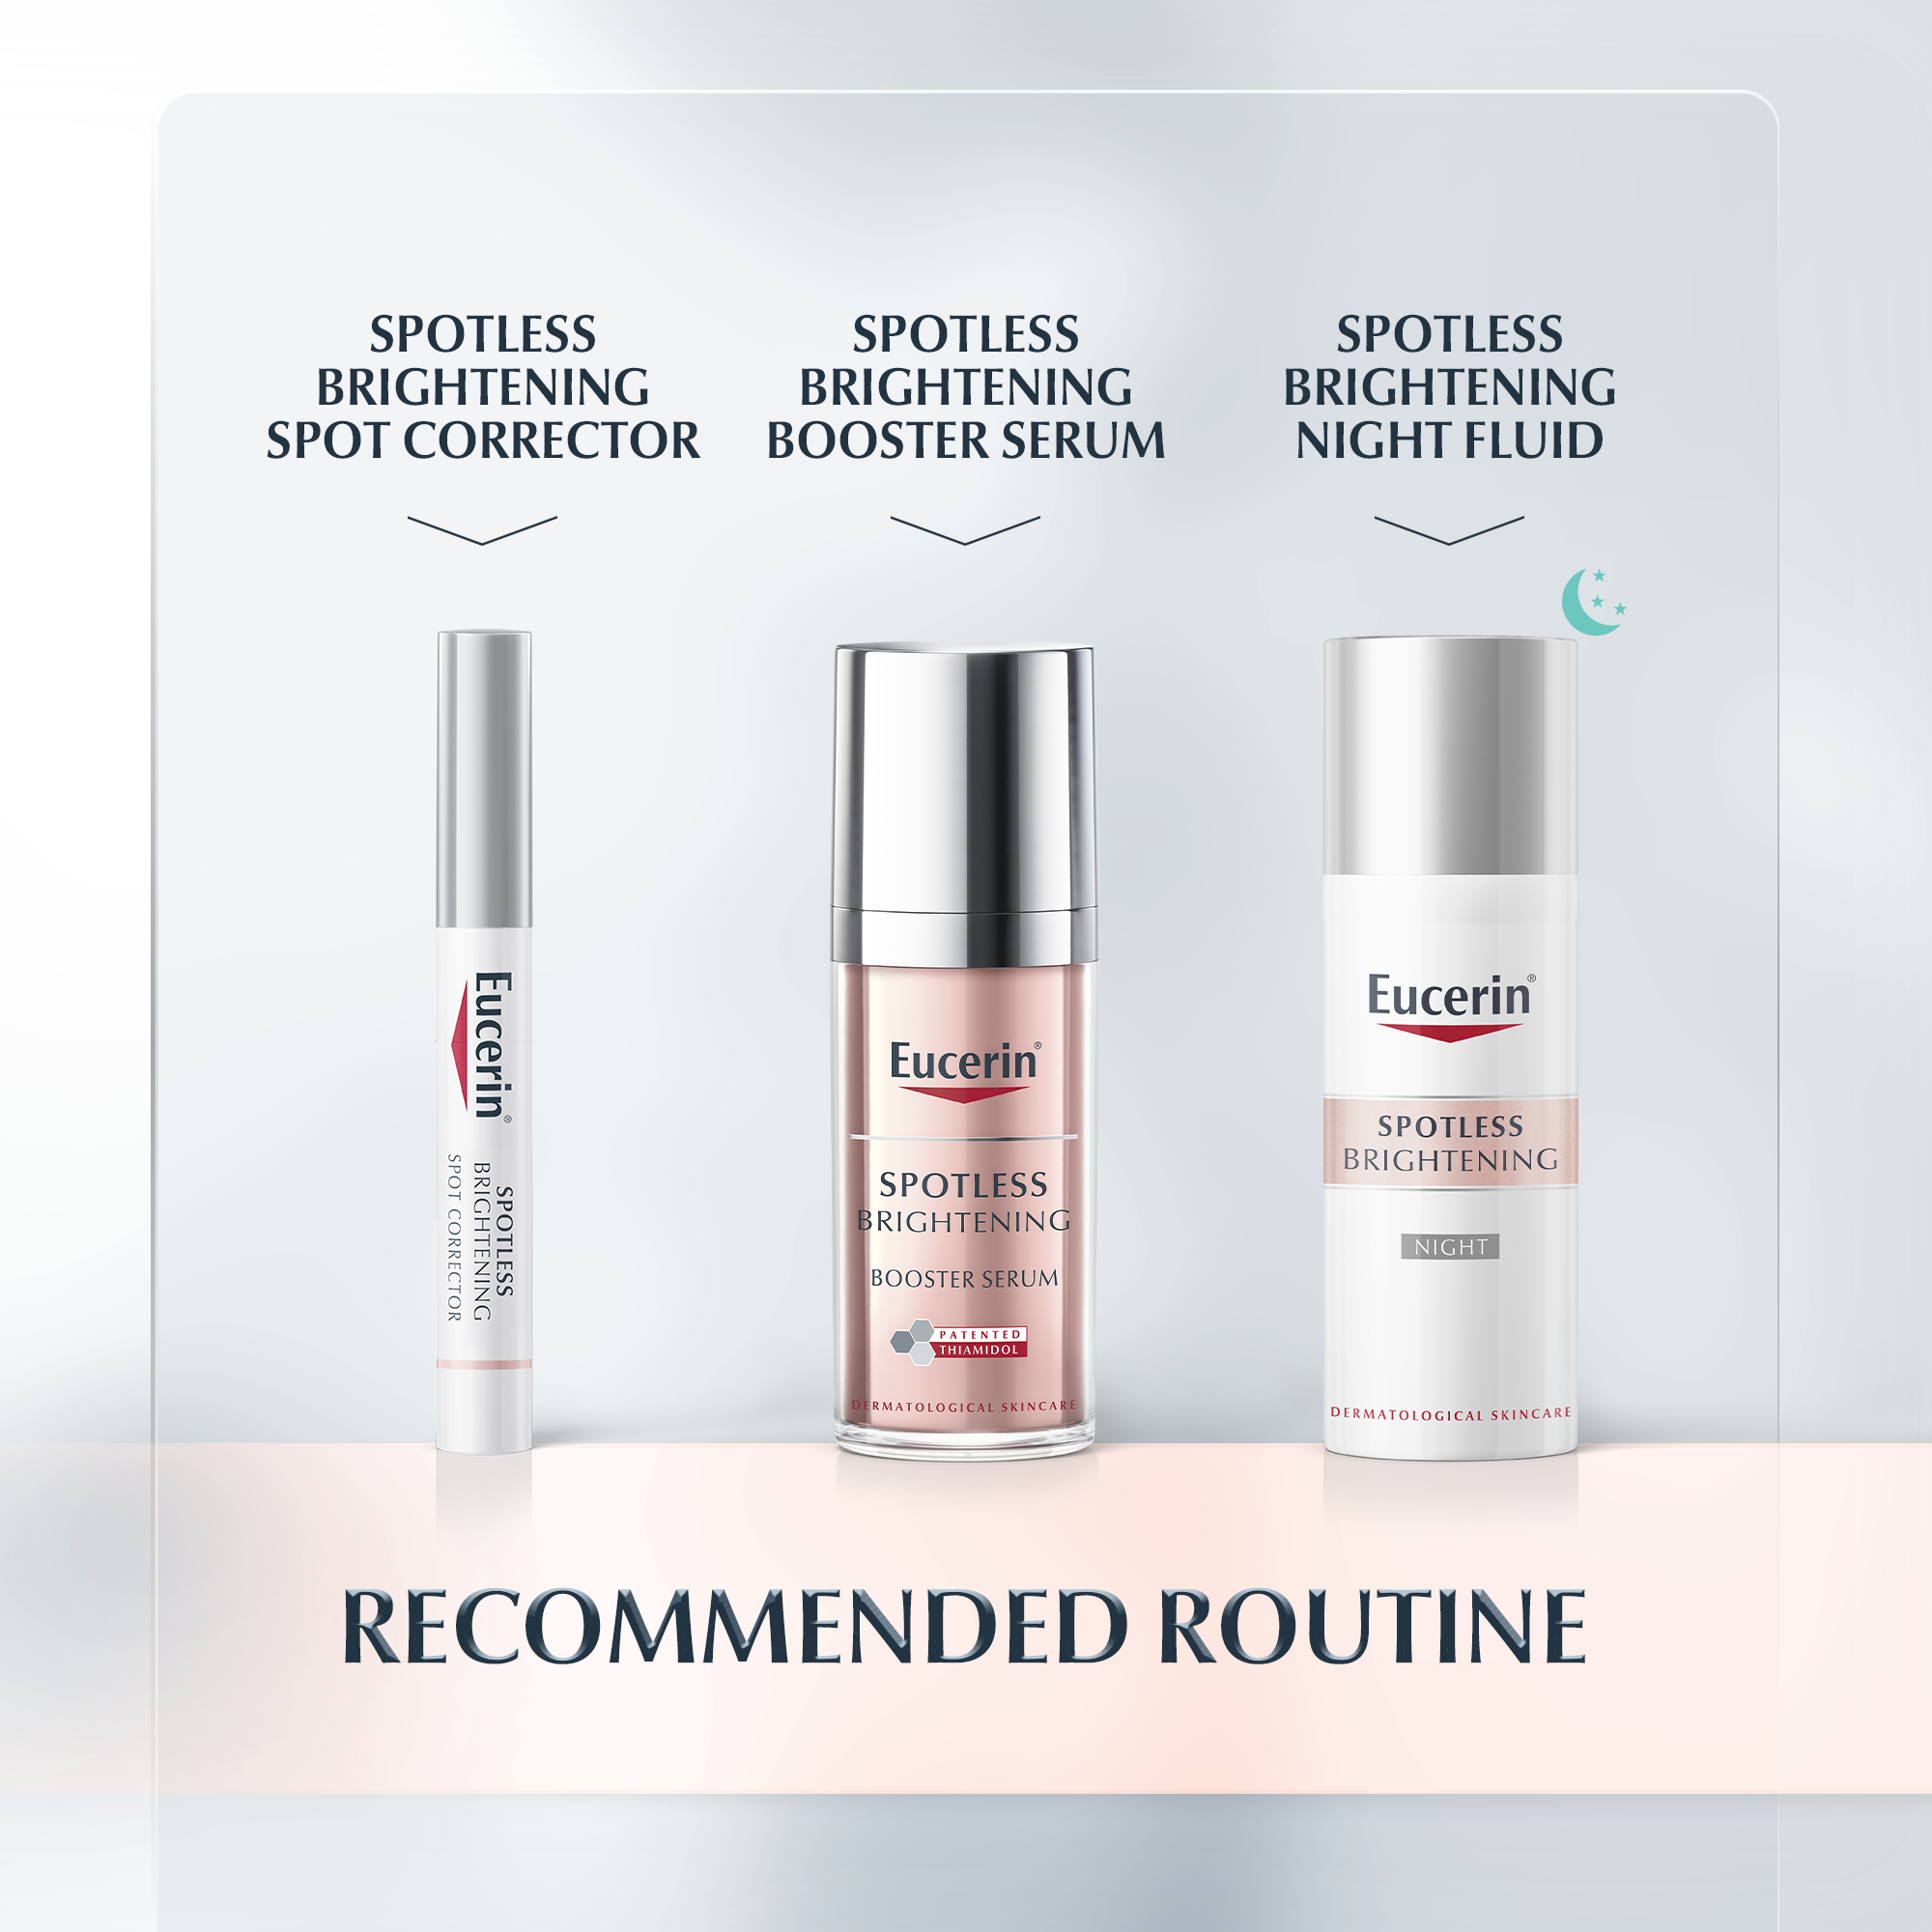 Recommended Routine for Spotless Brightening Spotless range